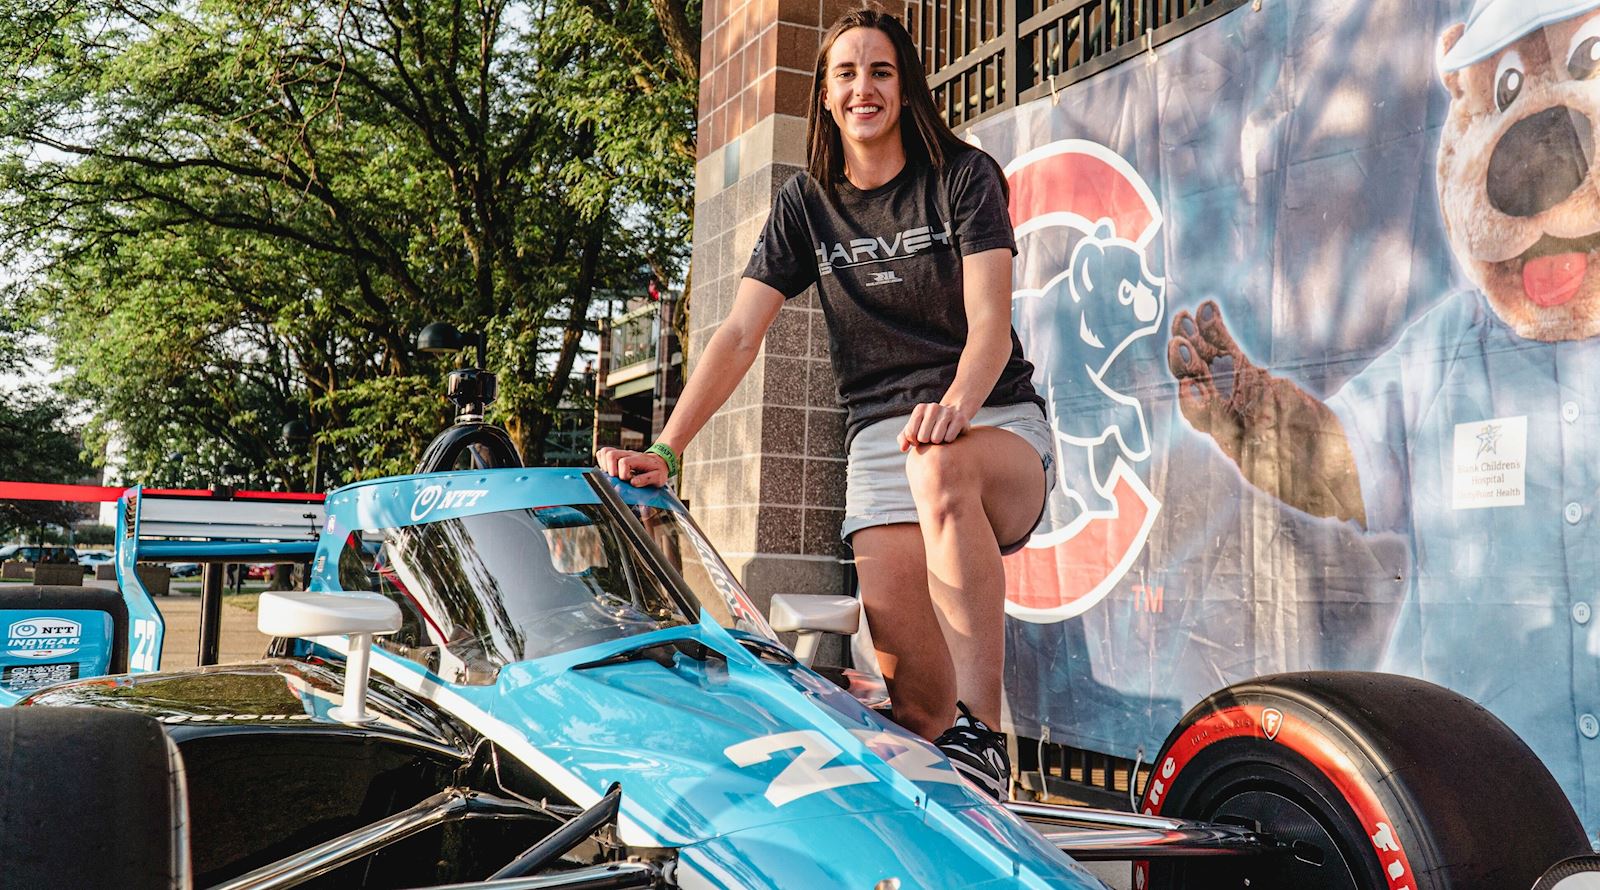 Iowa Women's Basketball Star Caitlin Clark to Participate in “Kids' Day” Activities During Hy-Vee INDYCAR Race Weekend